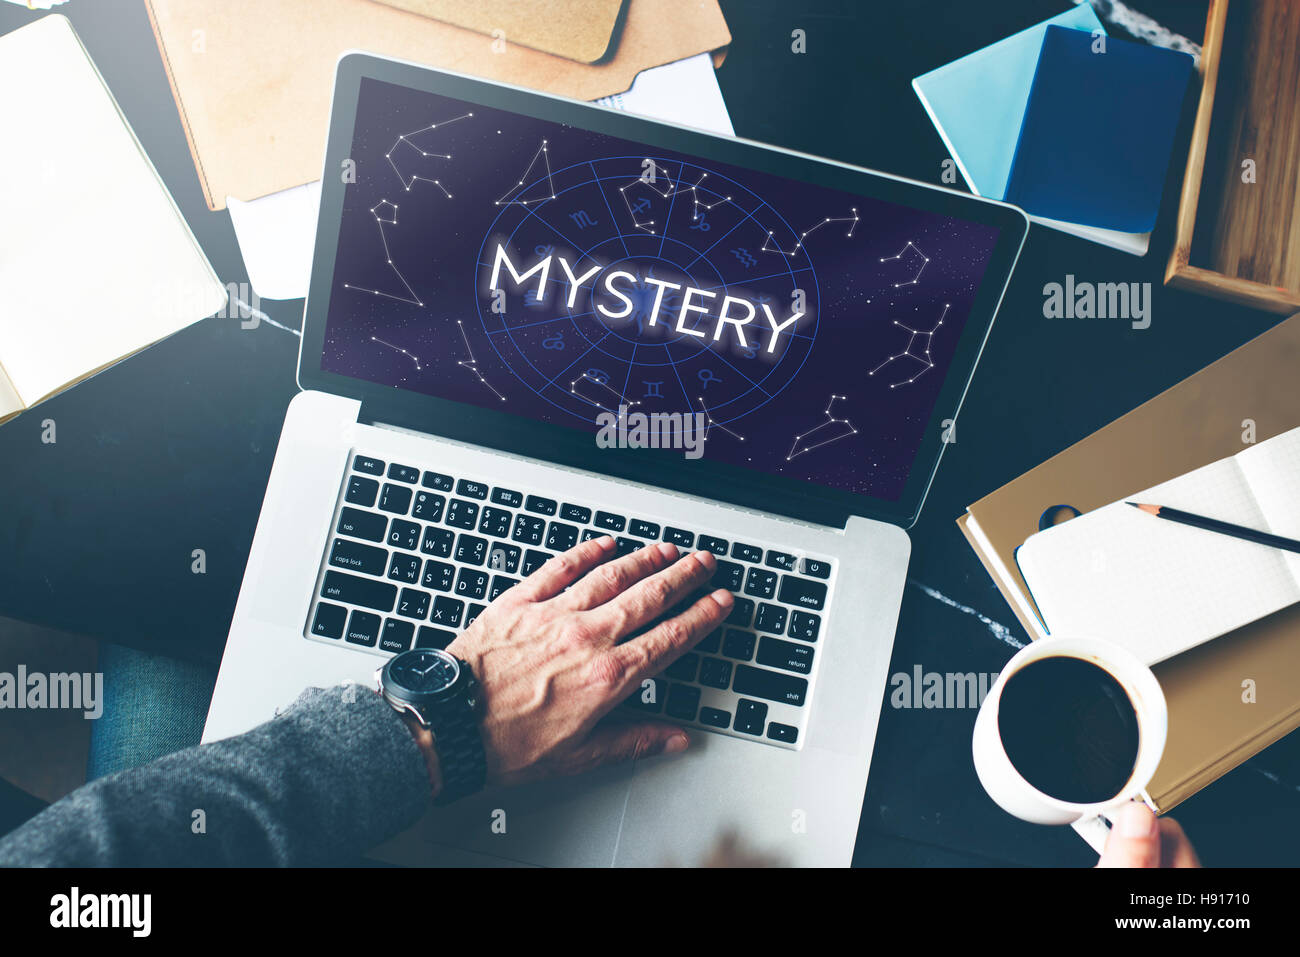 Mystery Planets Horoscpoe Astrology Concept Stock Photo